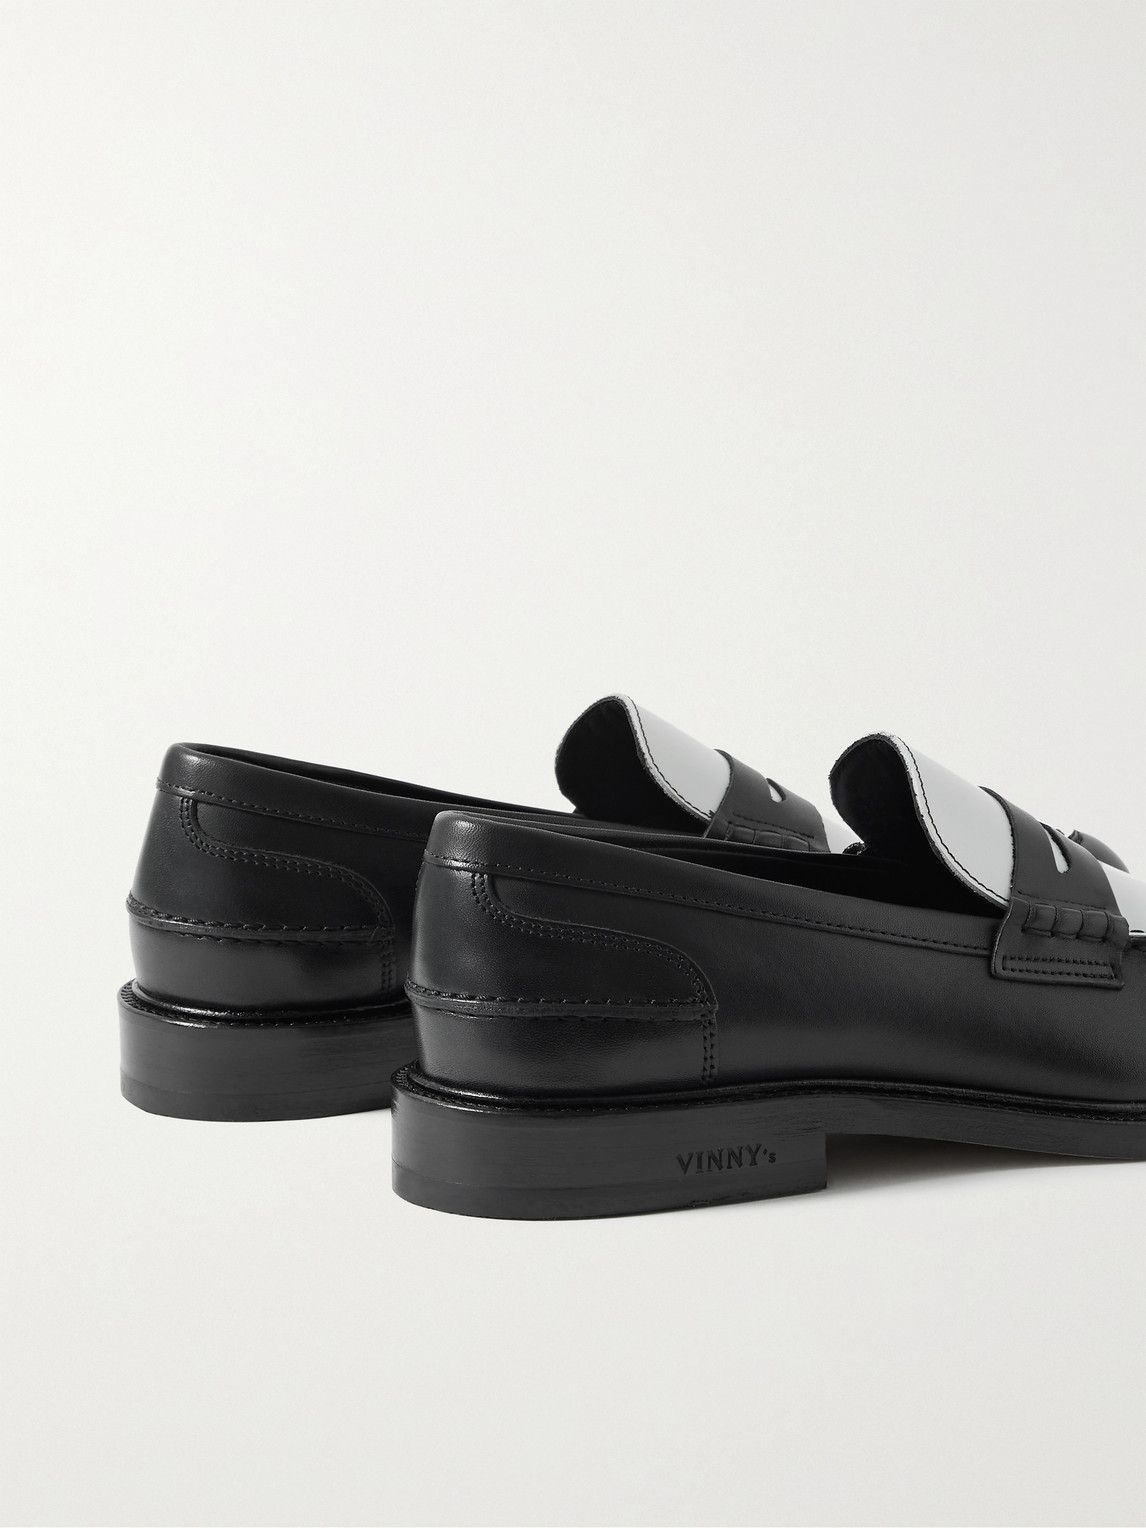 VINNY's - Townee Two-Tone Leather Penny Loafers - Black